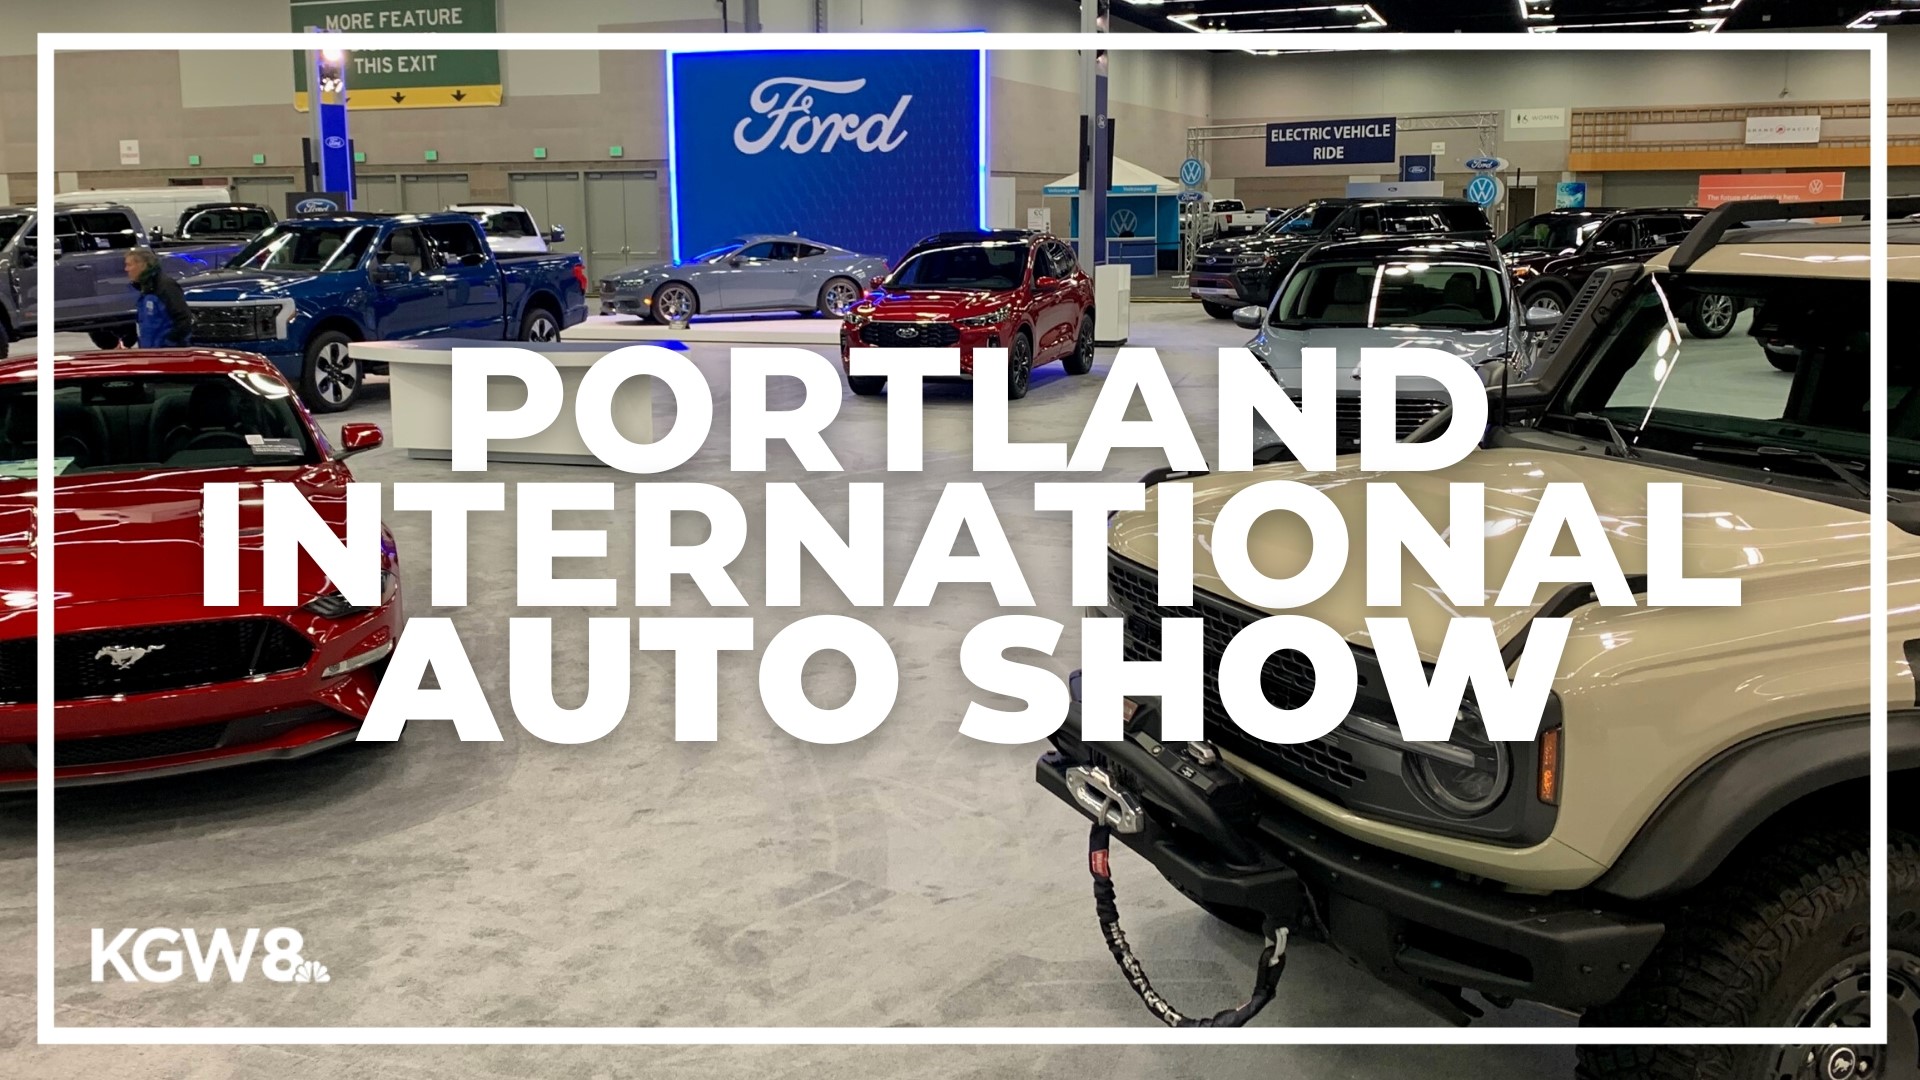 The show runs Feb. 2-5 at the Oregon Convention Center. Electric vehicles are a major feature of this year's event.